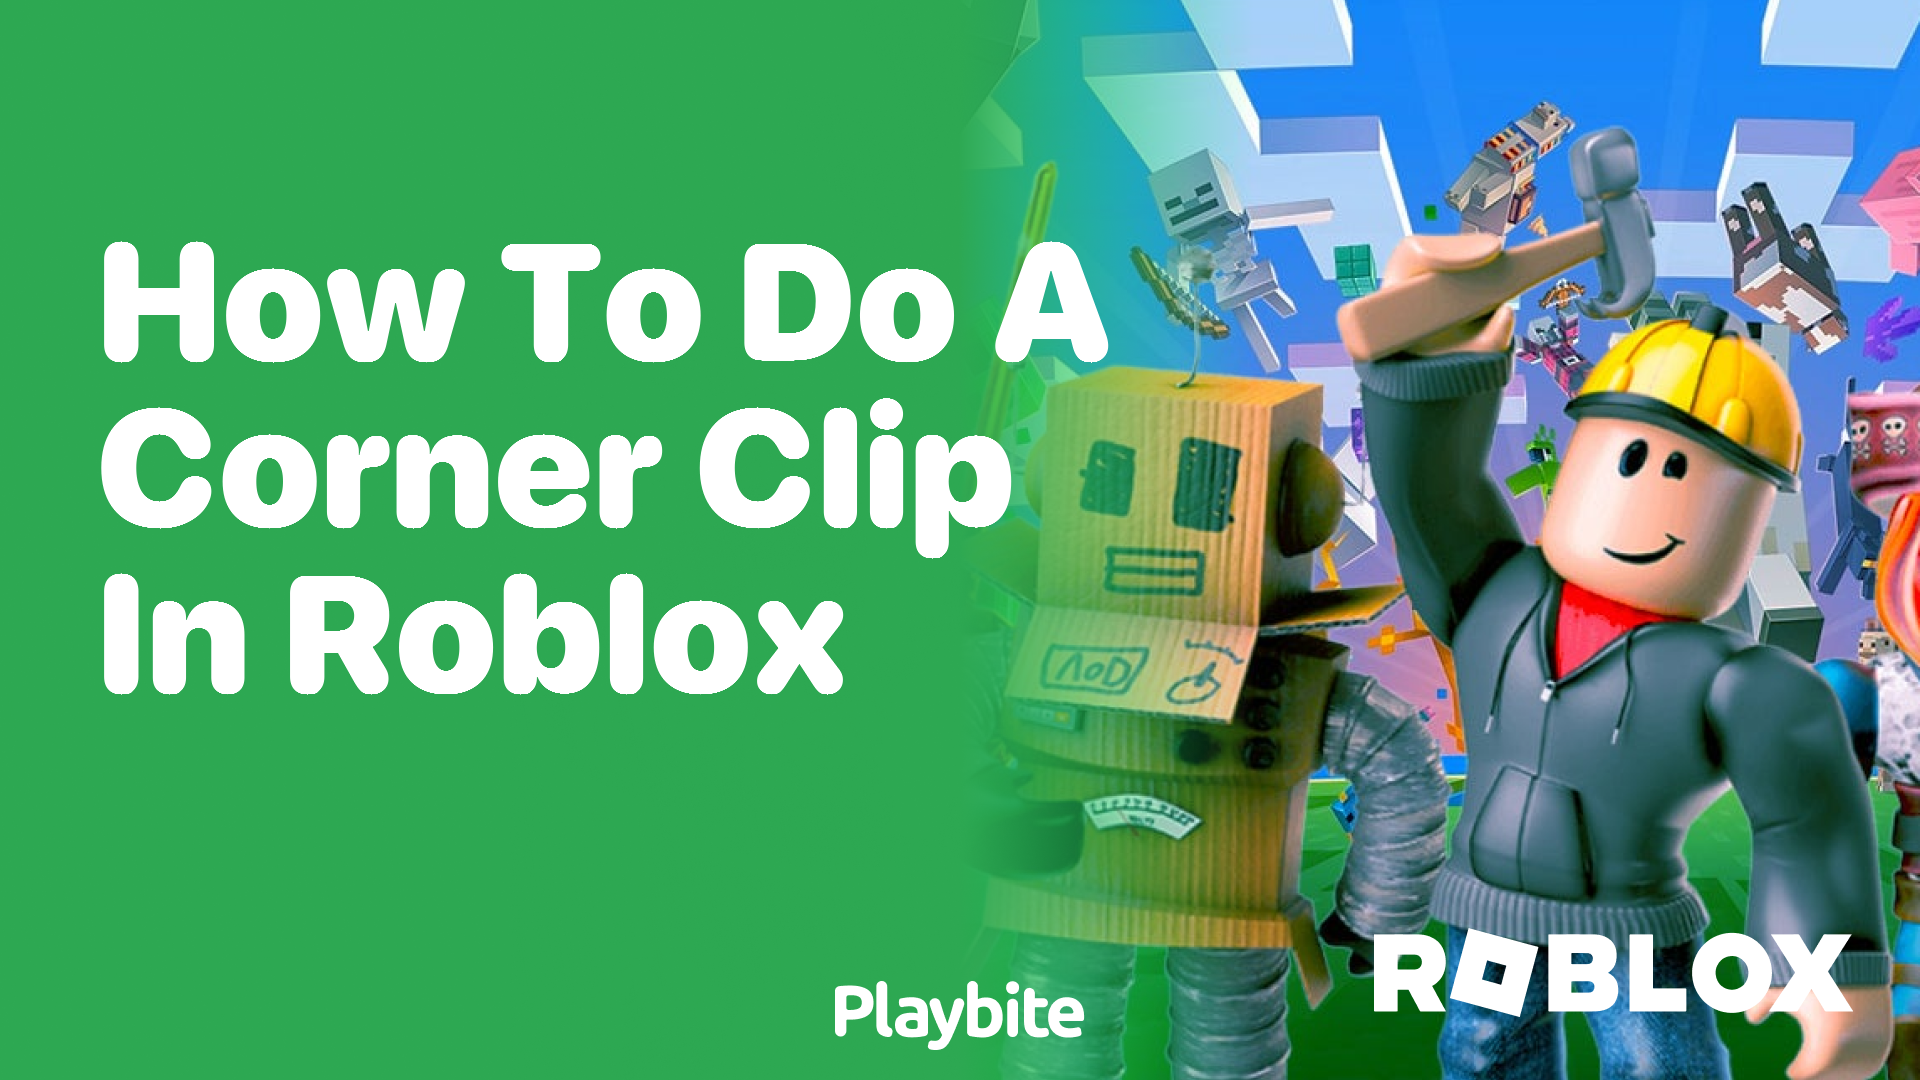 How to Do a Corner Clip in Roblox